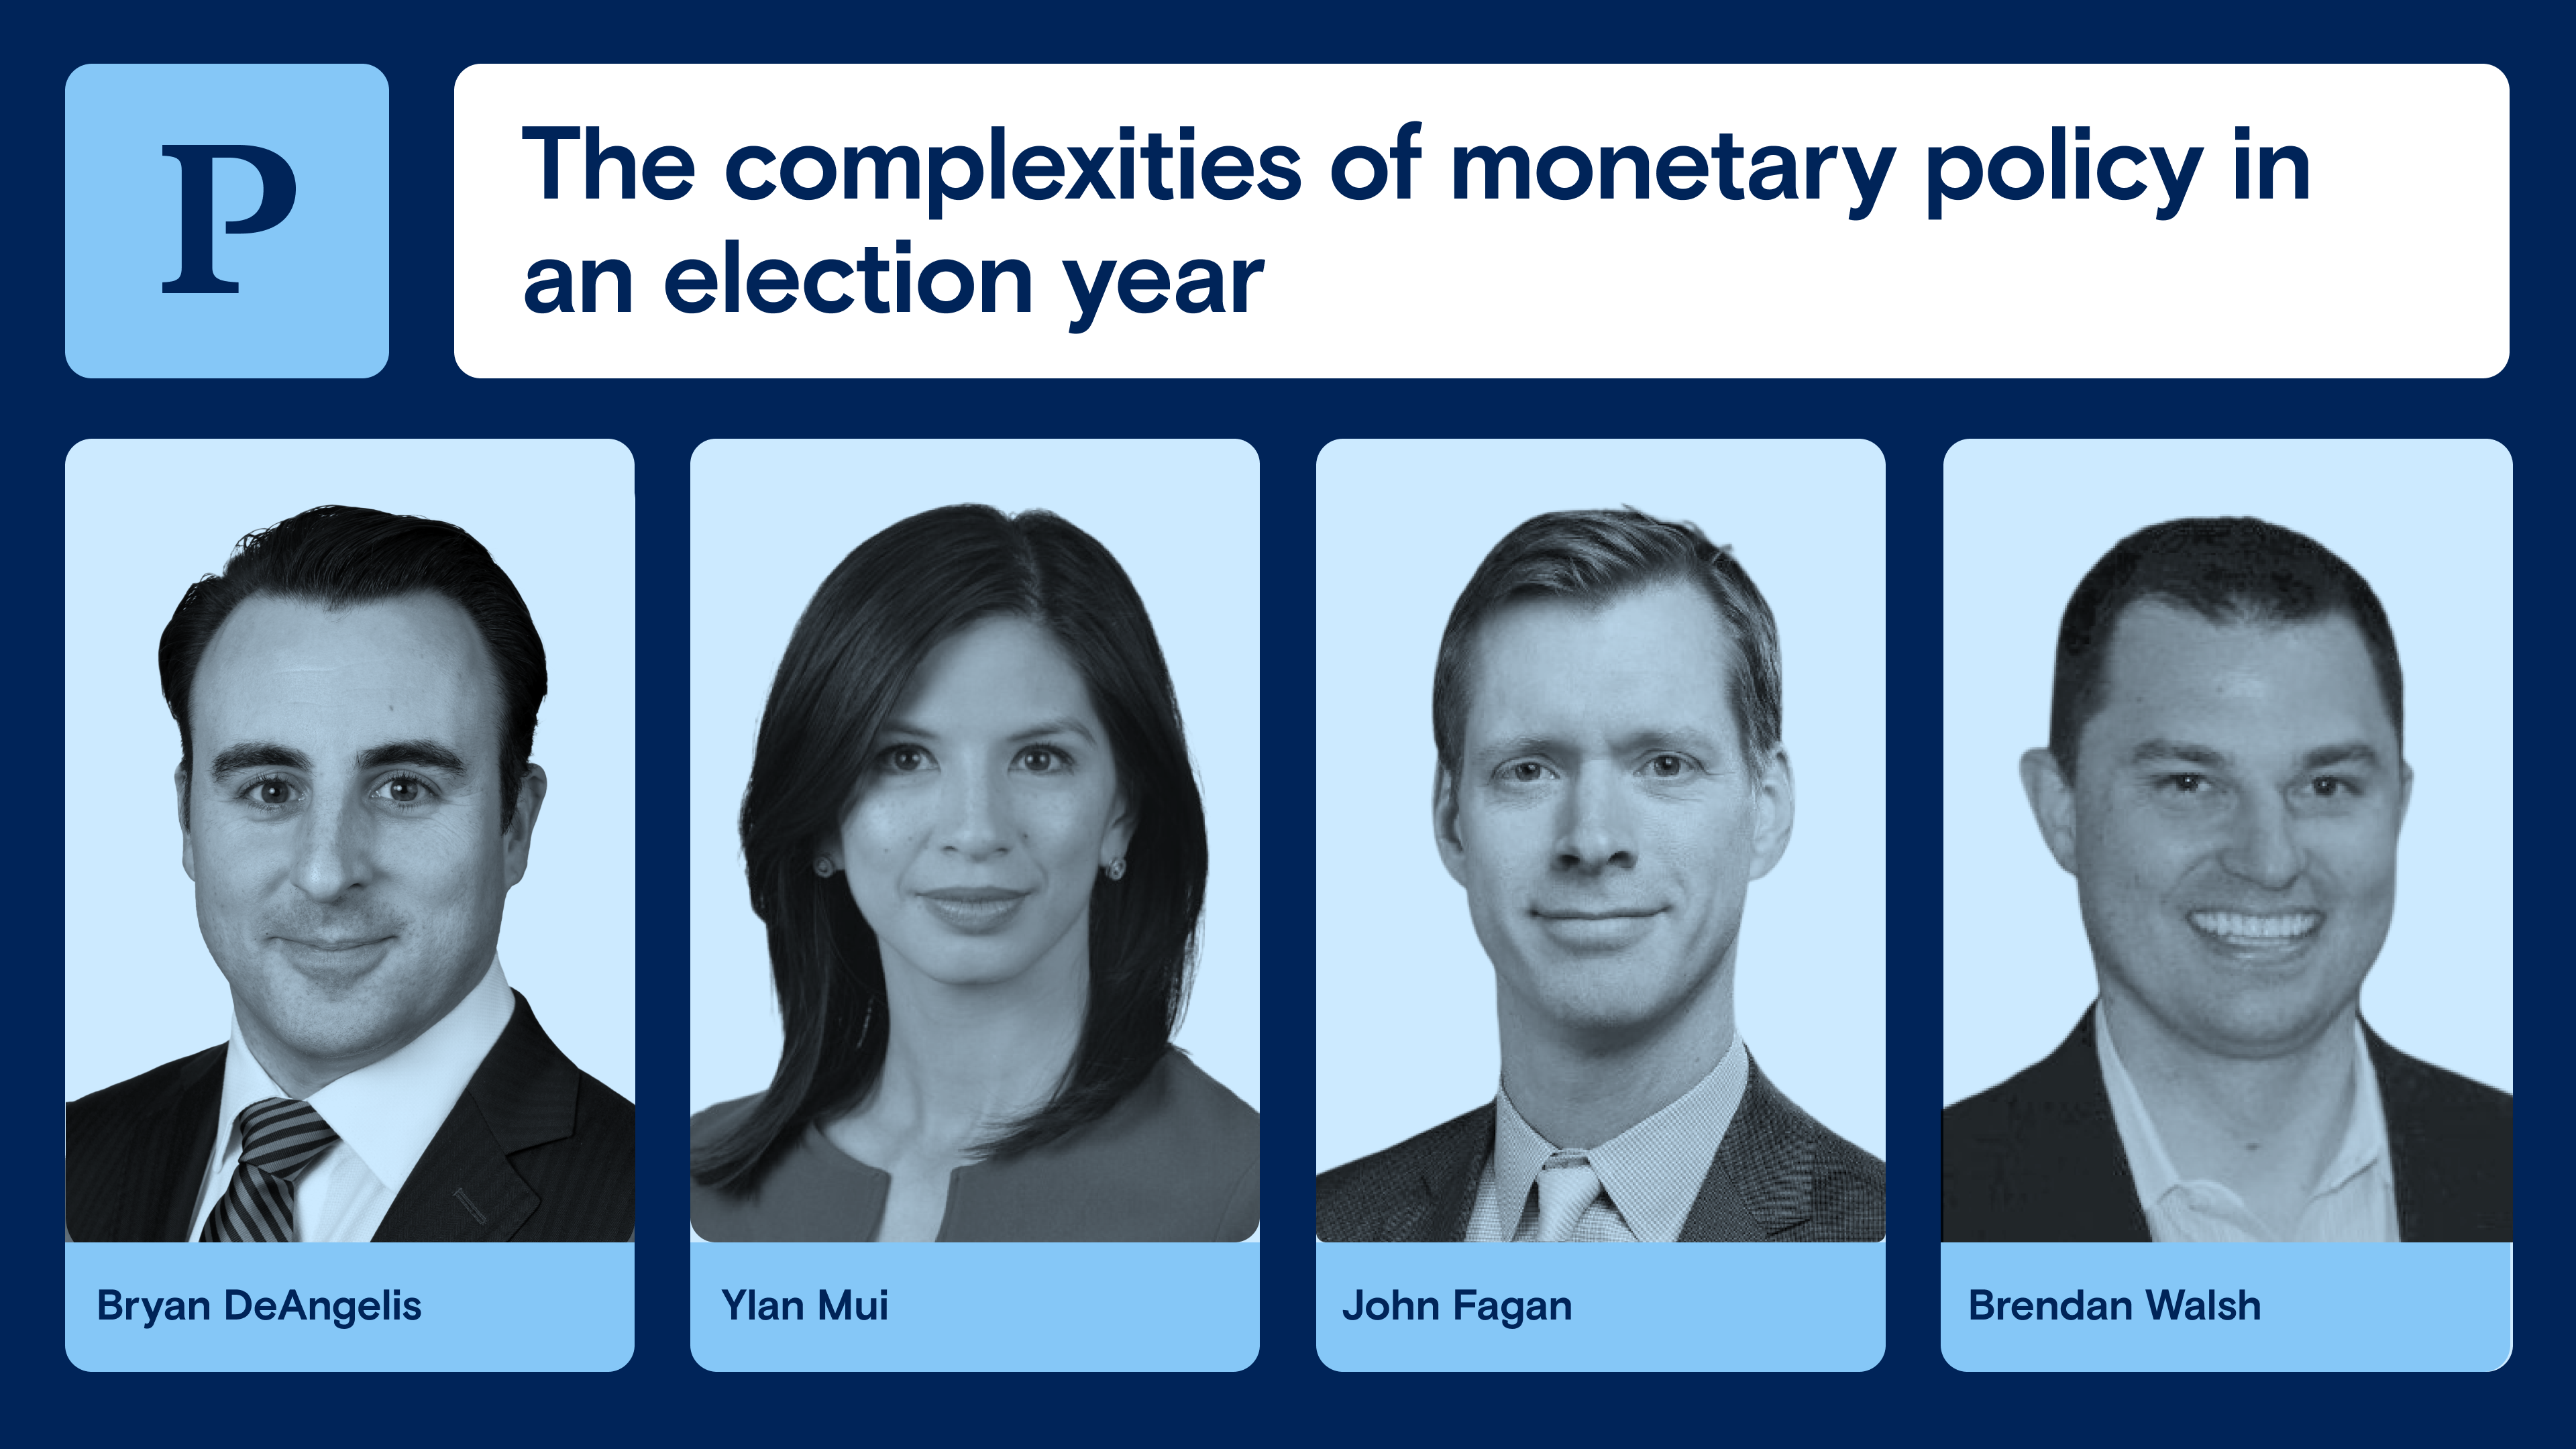 The complexities of monetary policy in an election year